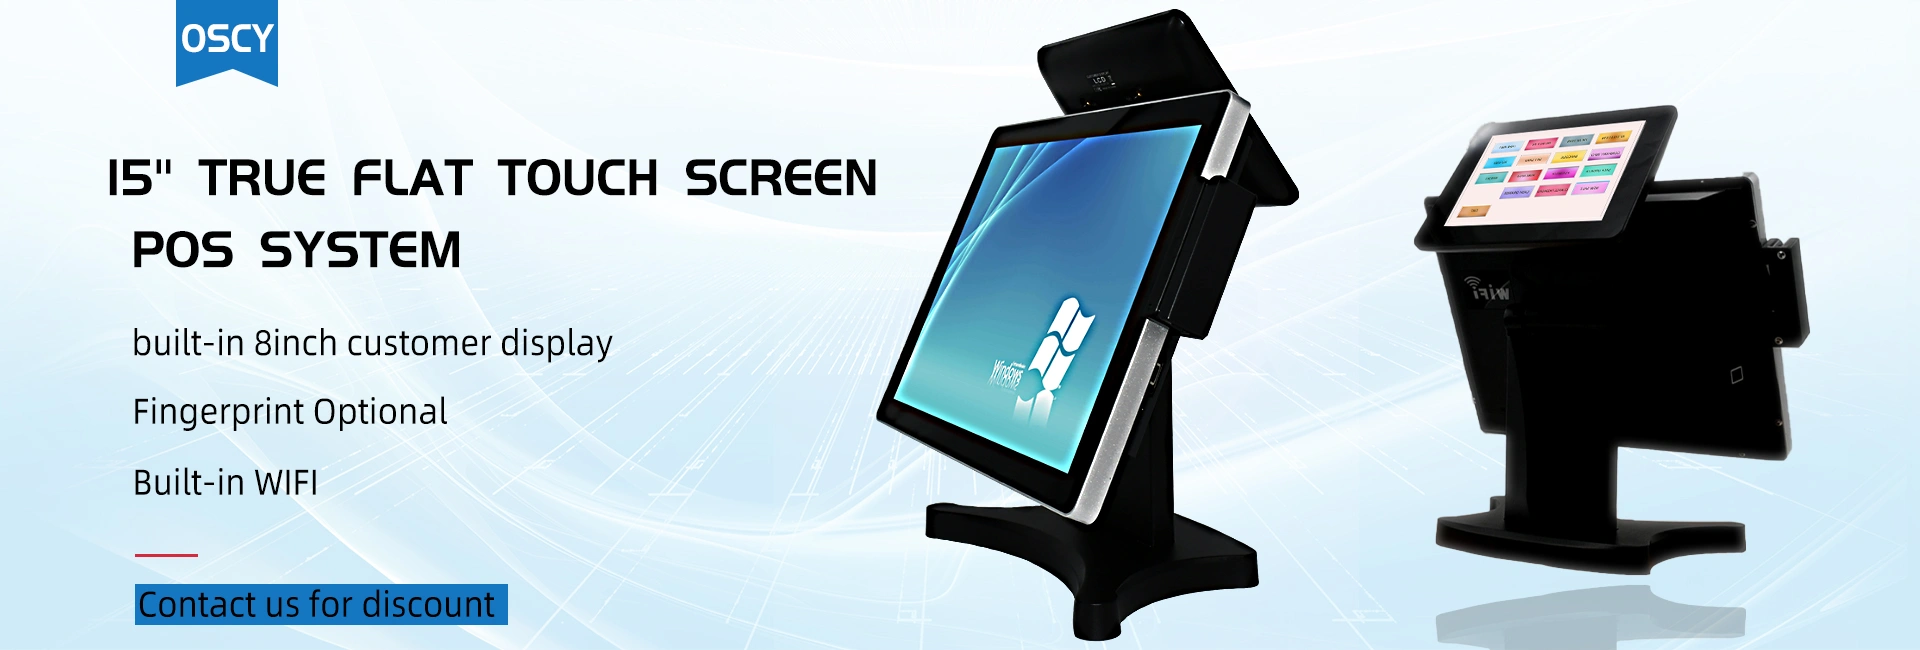 15" True Flat touch screen POS system built-in 8inch customer display